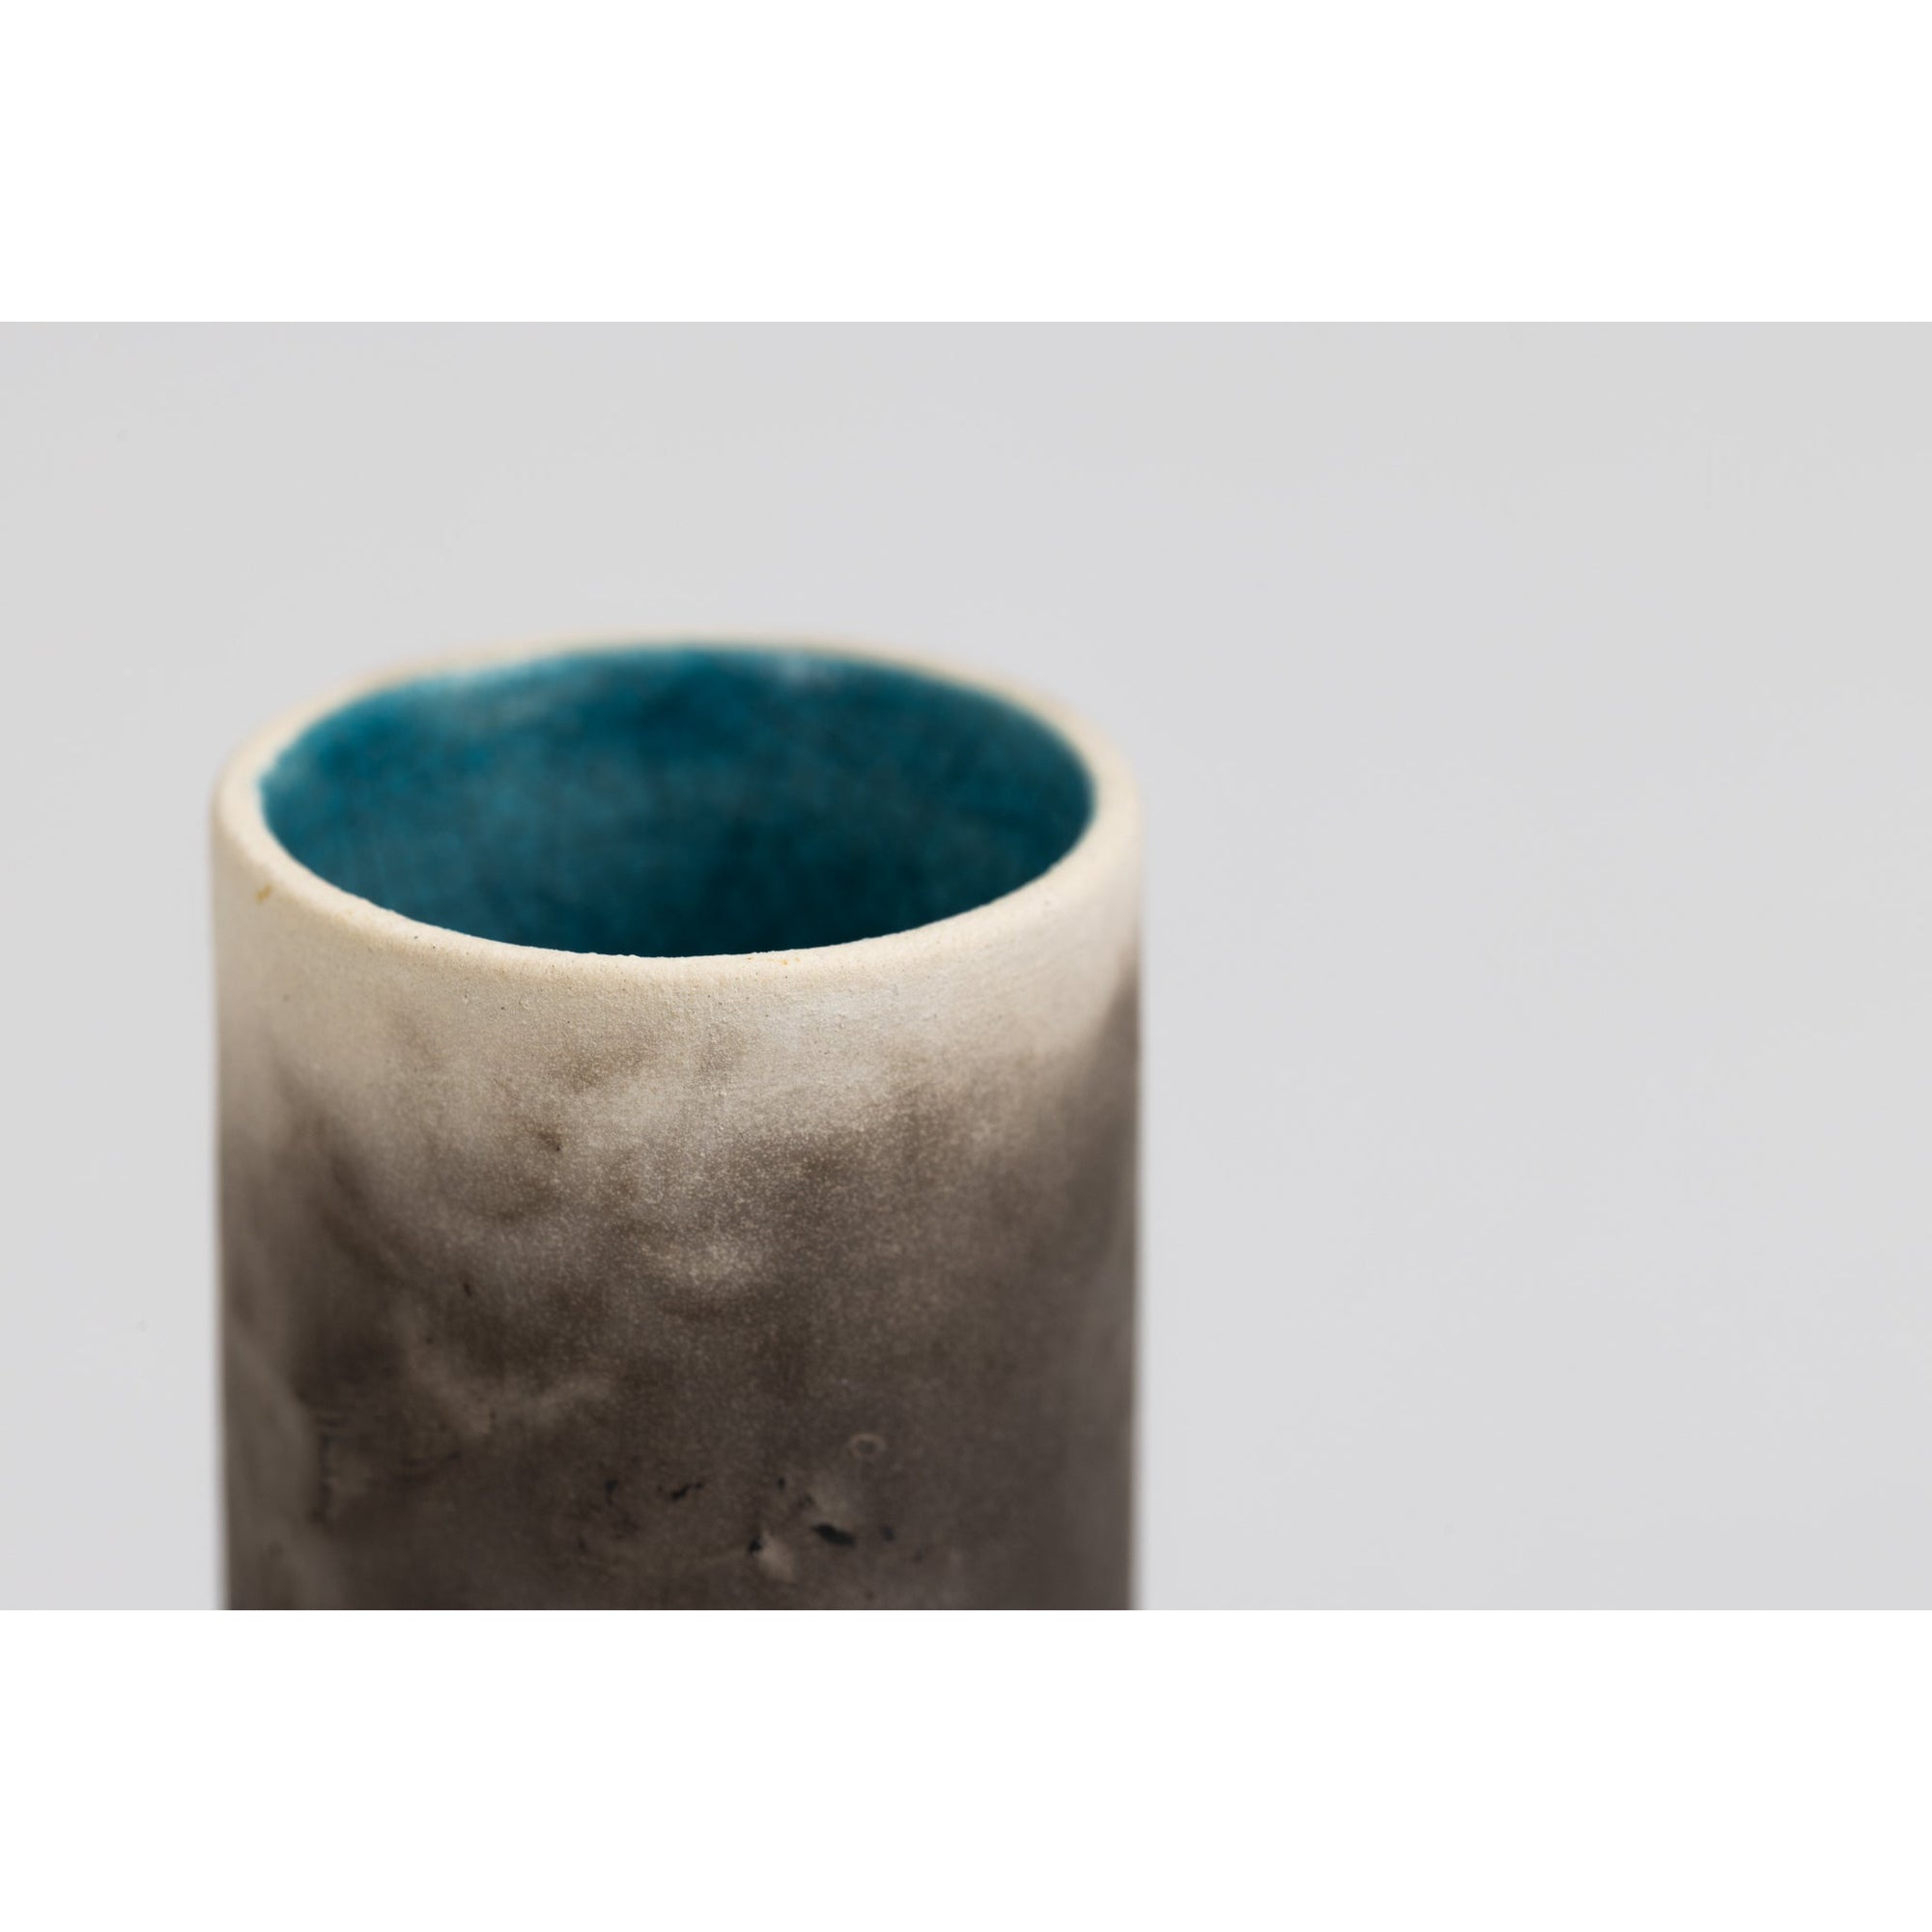 KSZ1 Raku Vessel by Kate Schuricht, available at Padstow Gallery, Cornwall